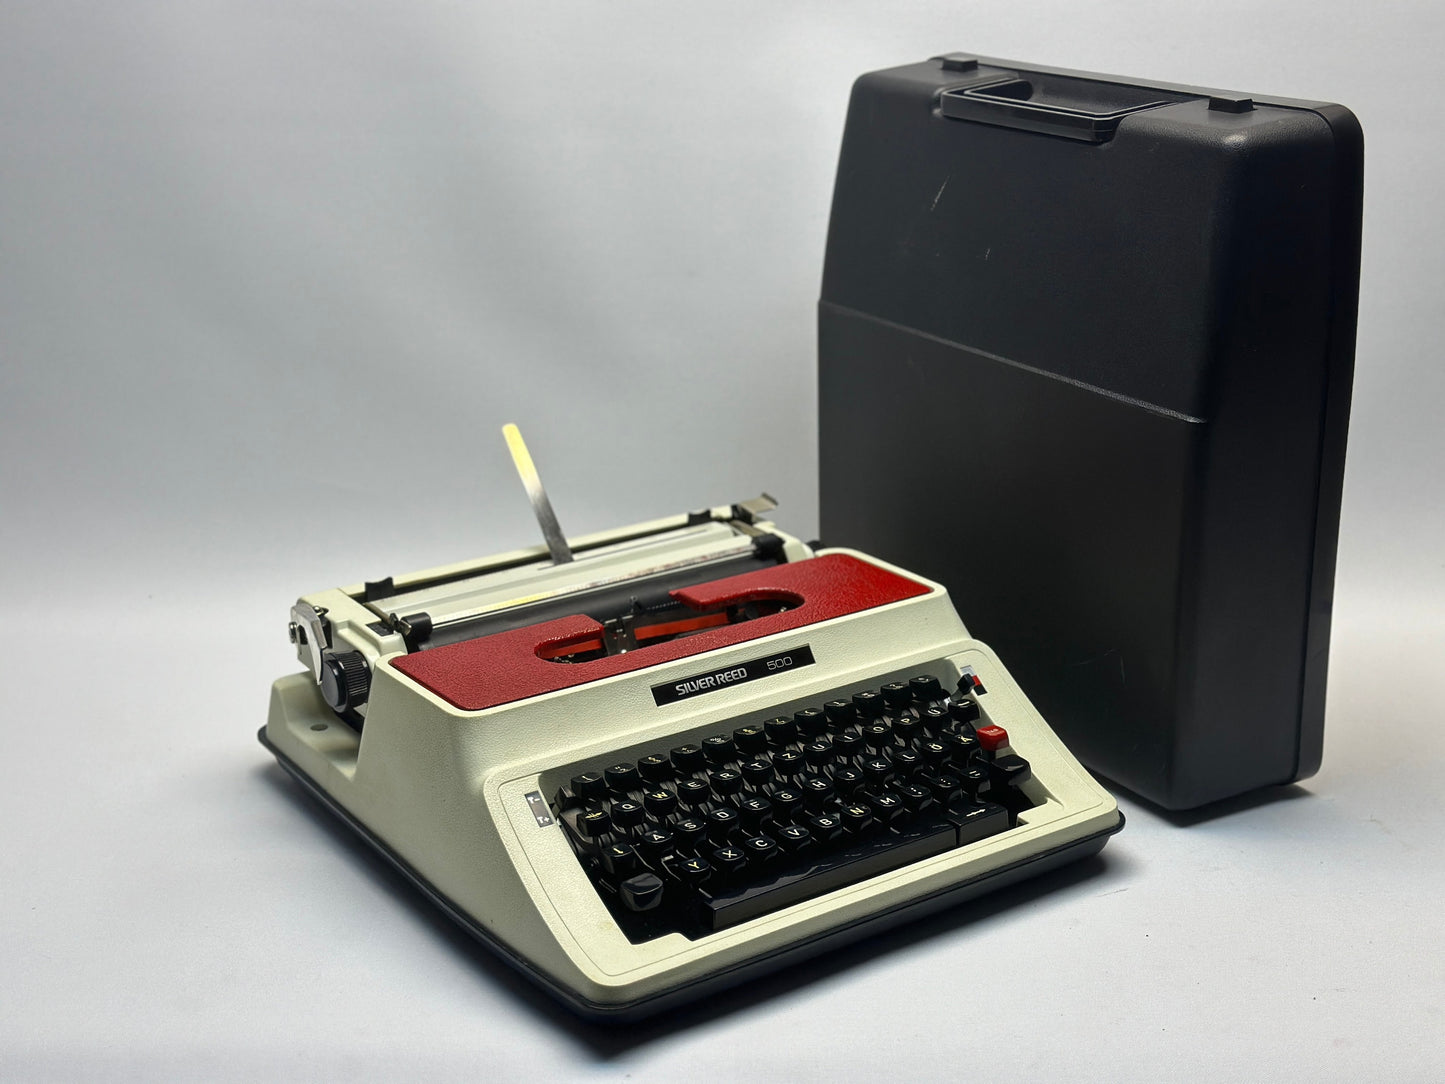 Embrace Vintage Style with the Silver Reed 500 Typewriter - Red Cover, QWERTZ Keyboard, Antique Gift